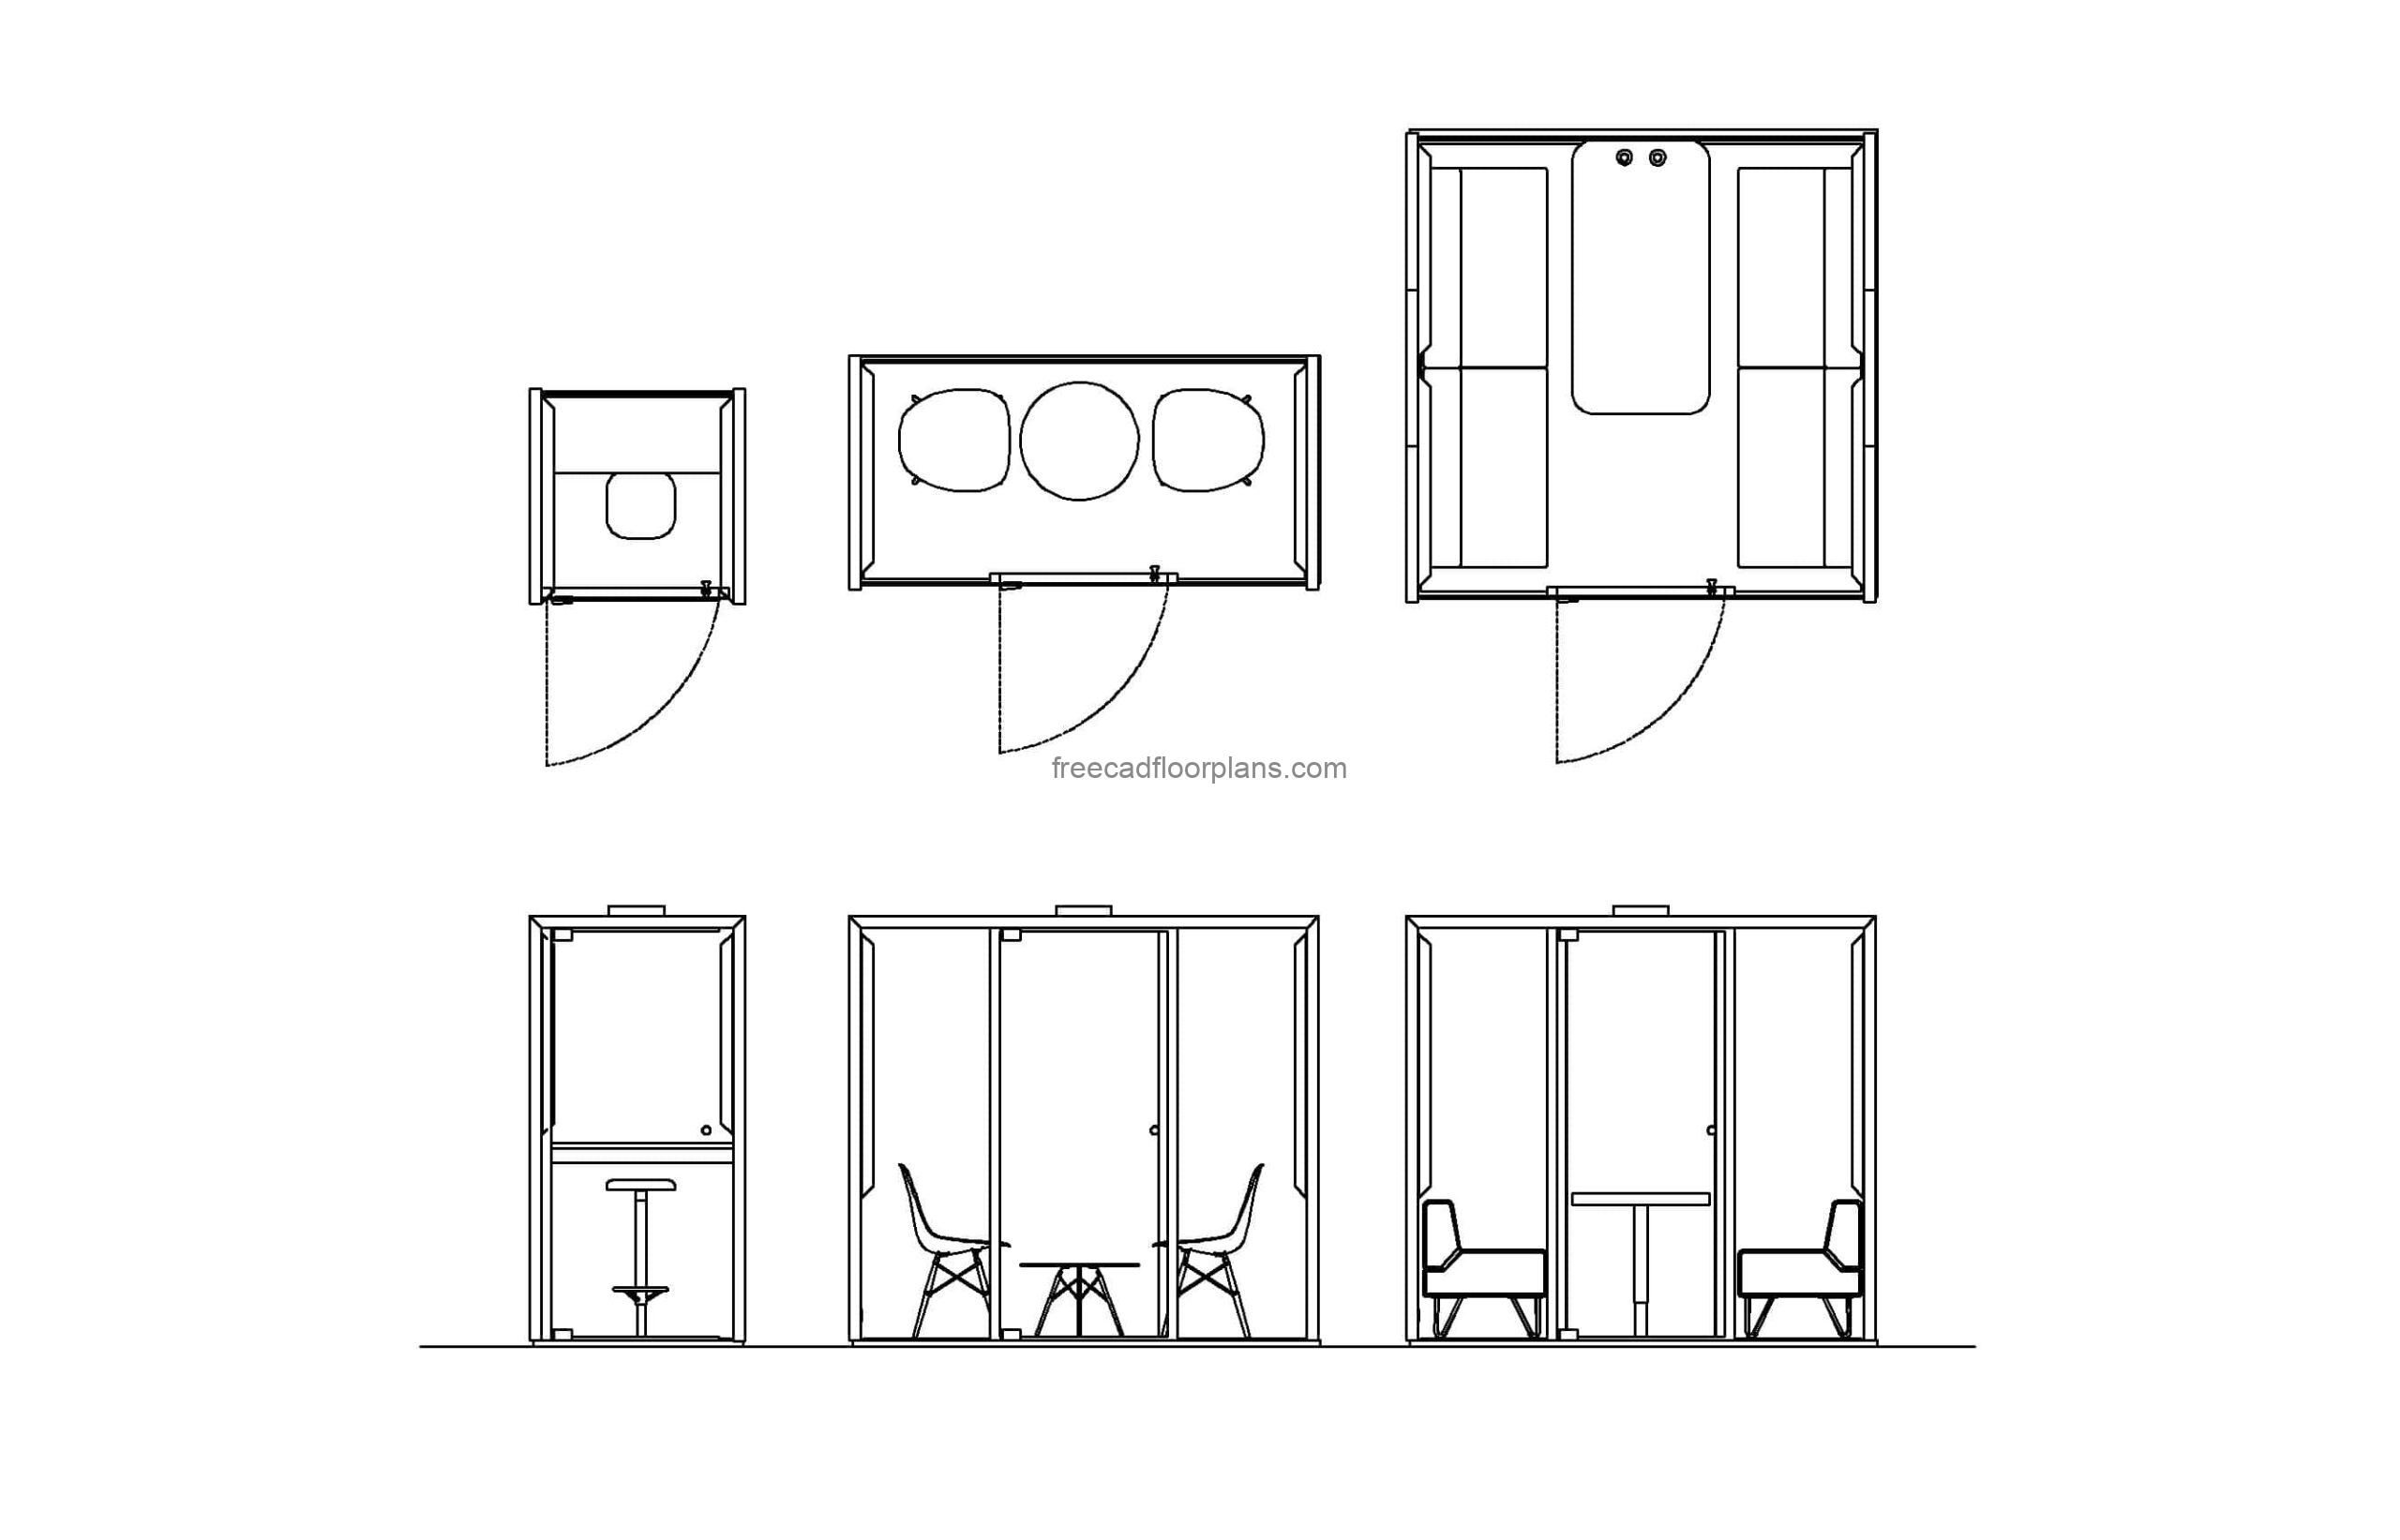 office phone booths autocad drawing, plan and elevation 2d views, dwg file download for free